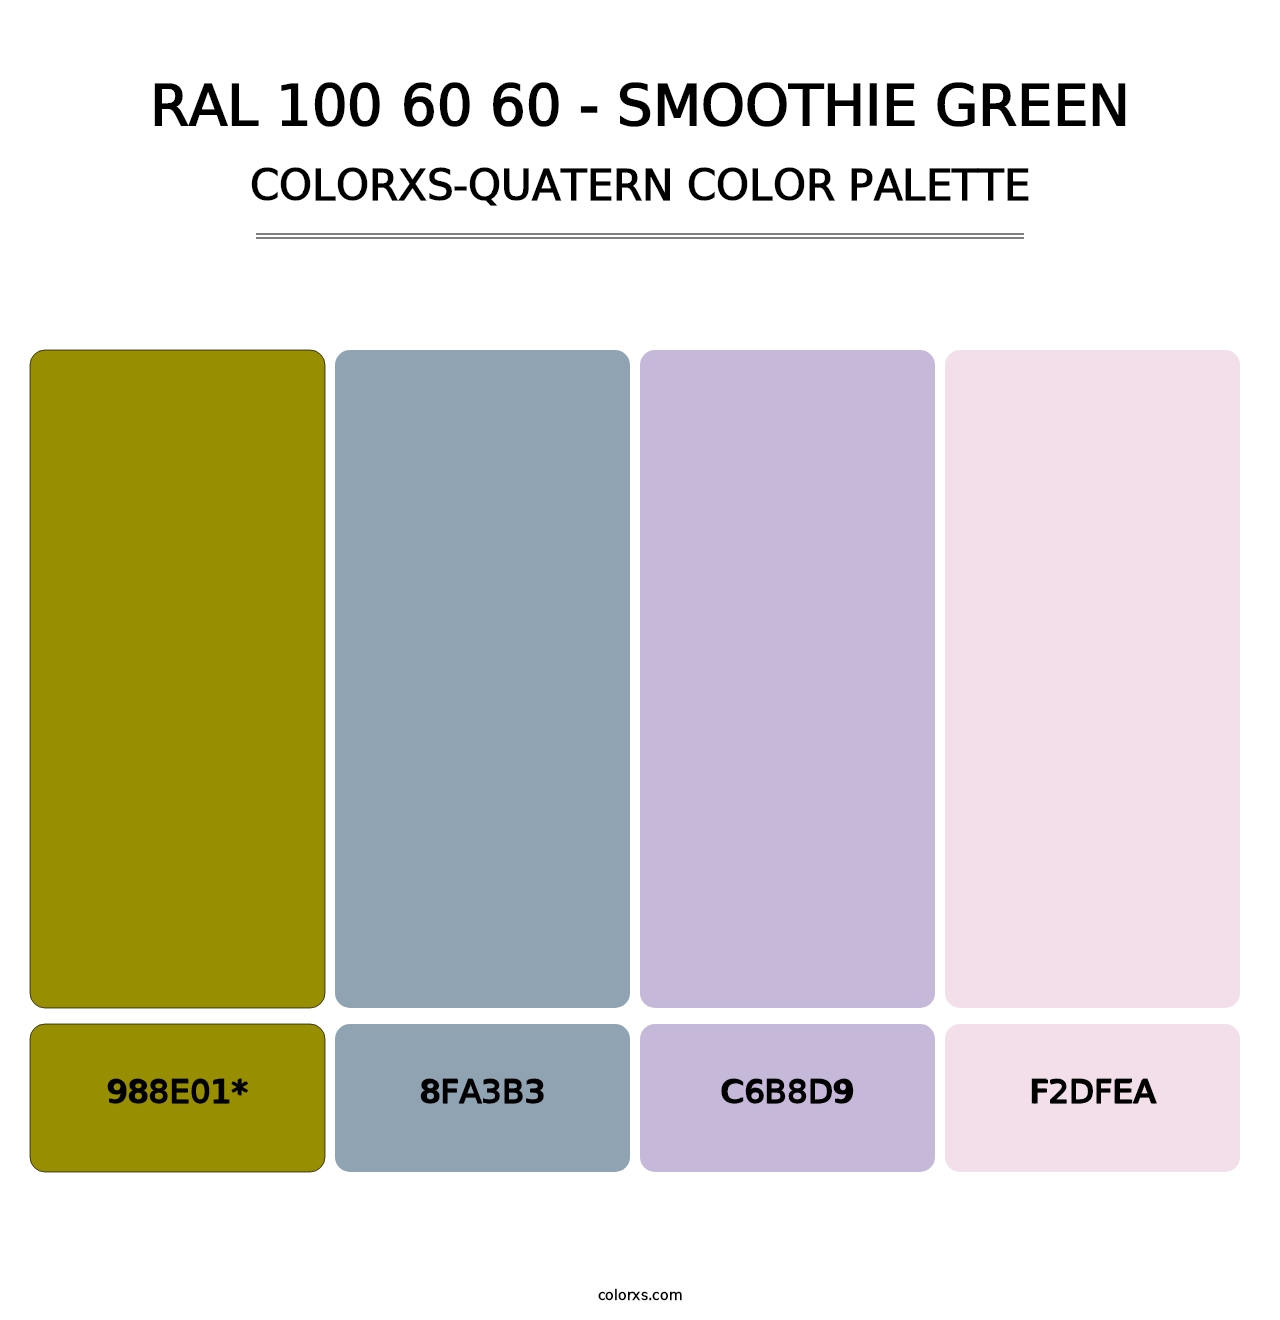 RAL 100 60 60 - Smoothie Green - Colorxs Quatern Palette